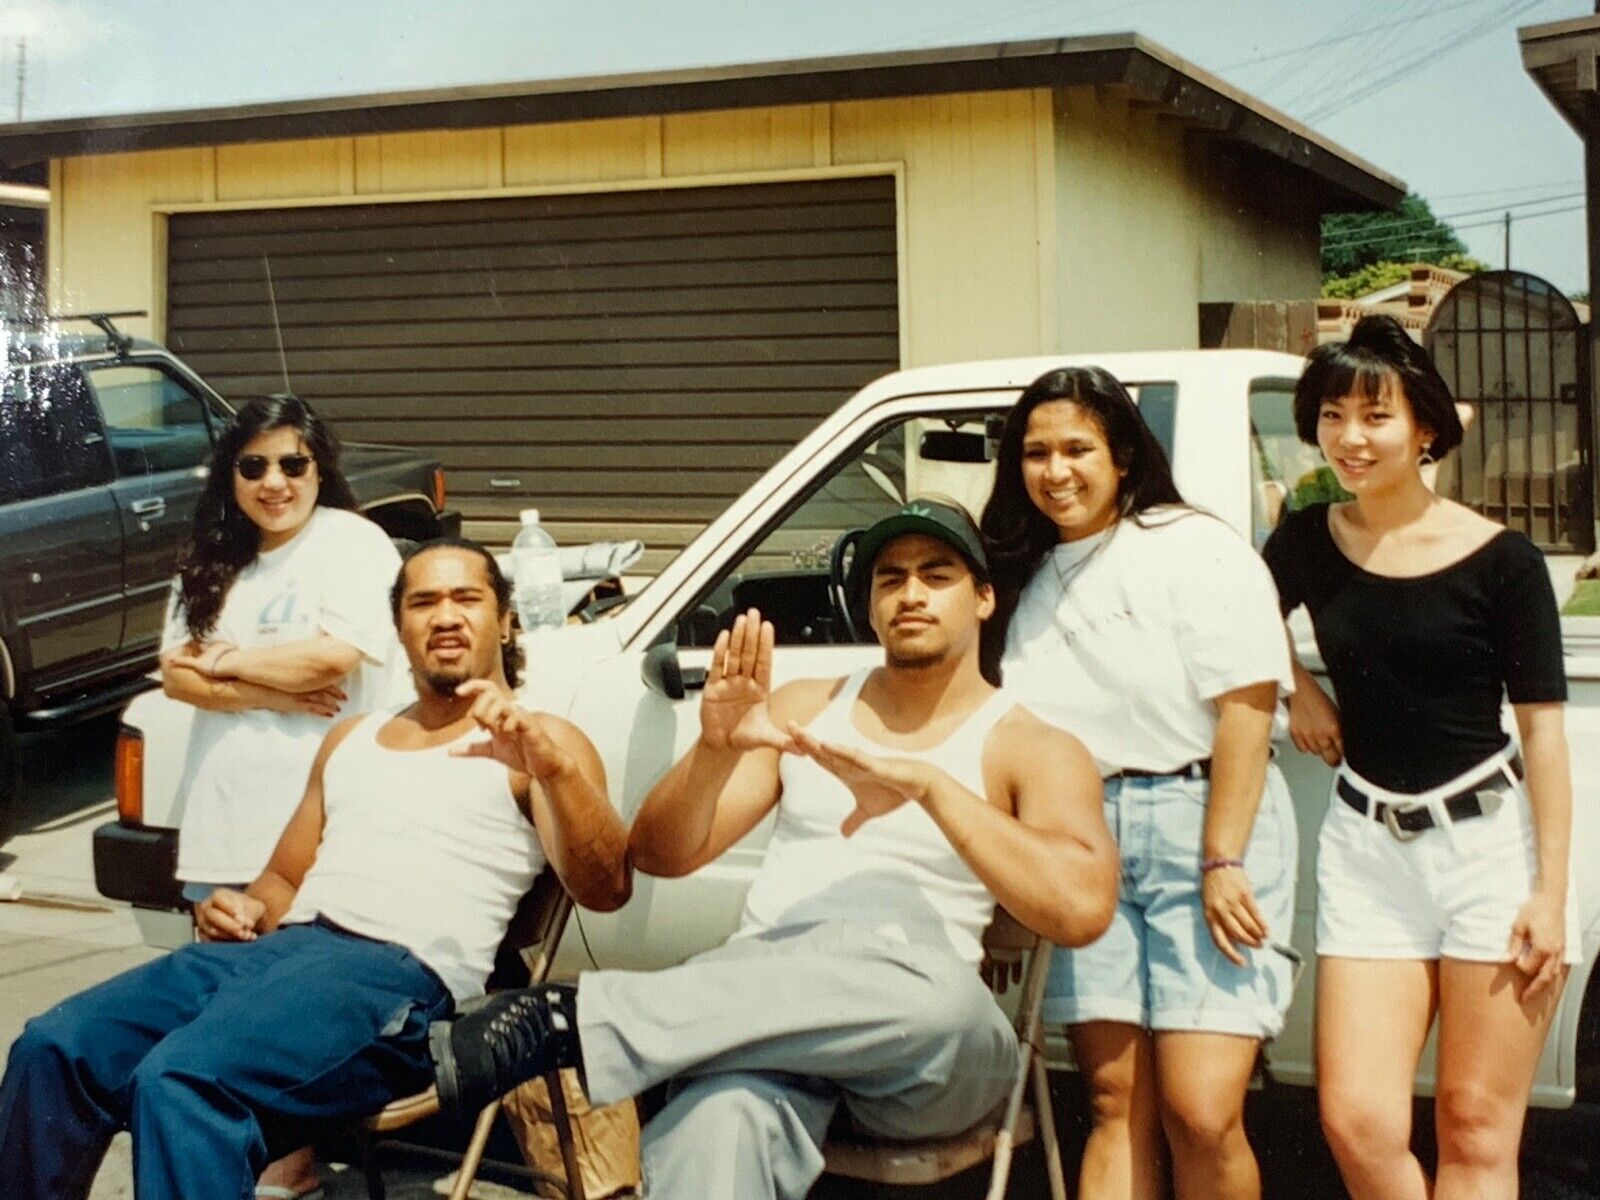 (AtC) FOUND PHOTO Photograph 4x6 Color Asian Guys Throwing Gang Signs Signals 